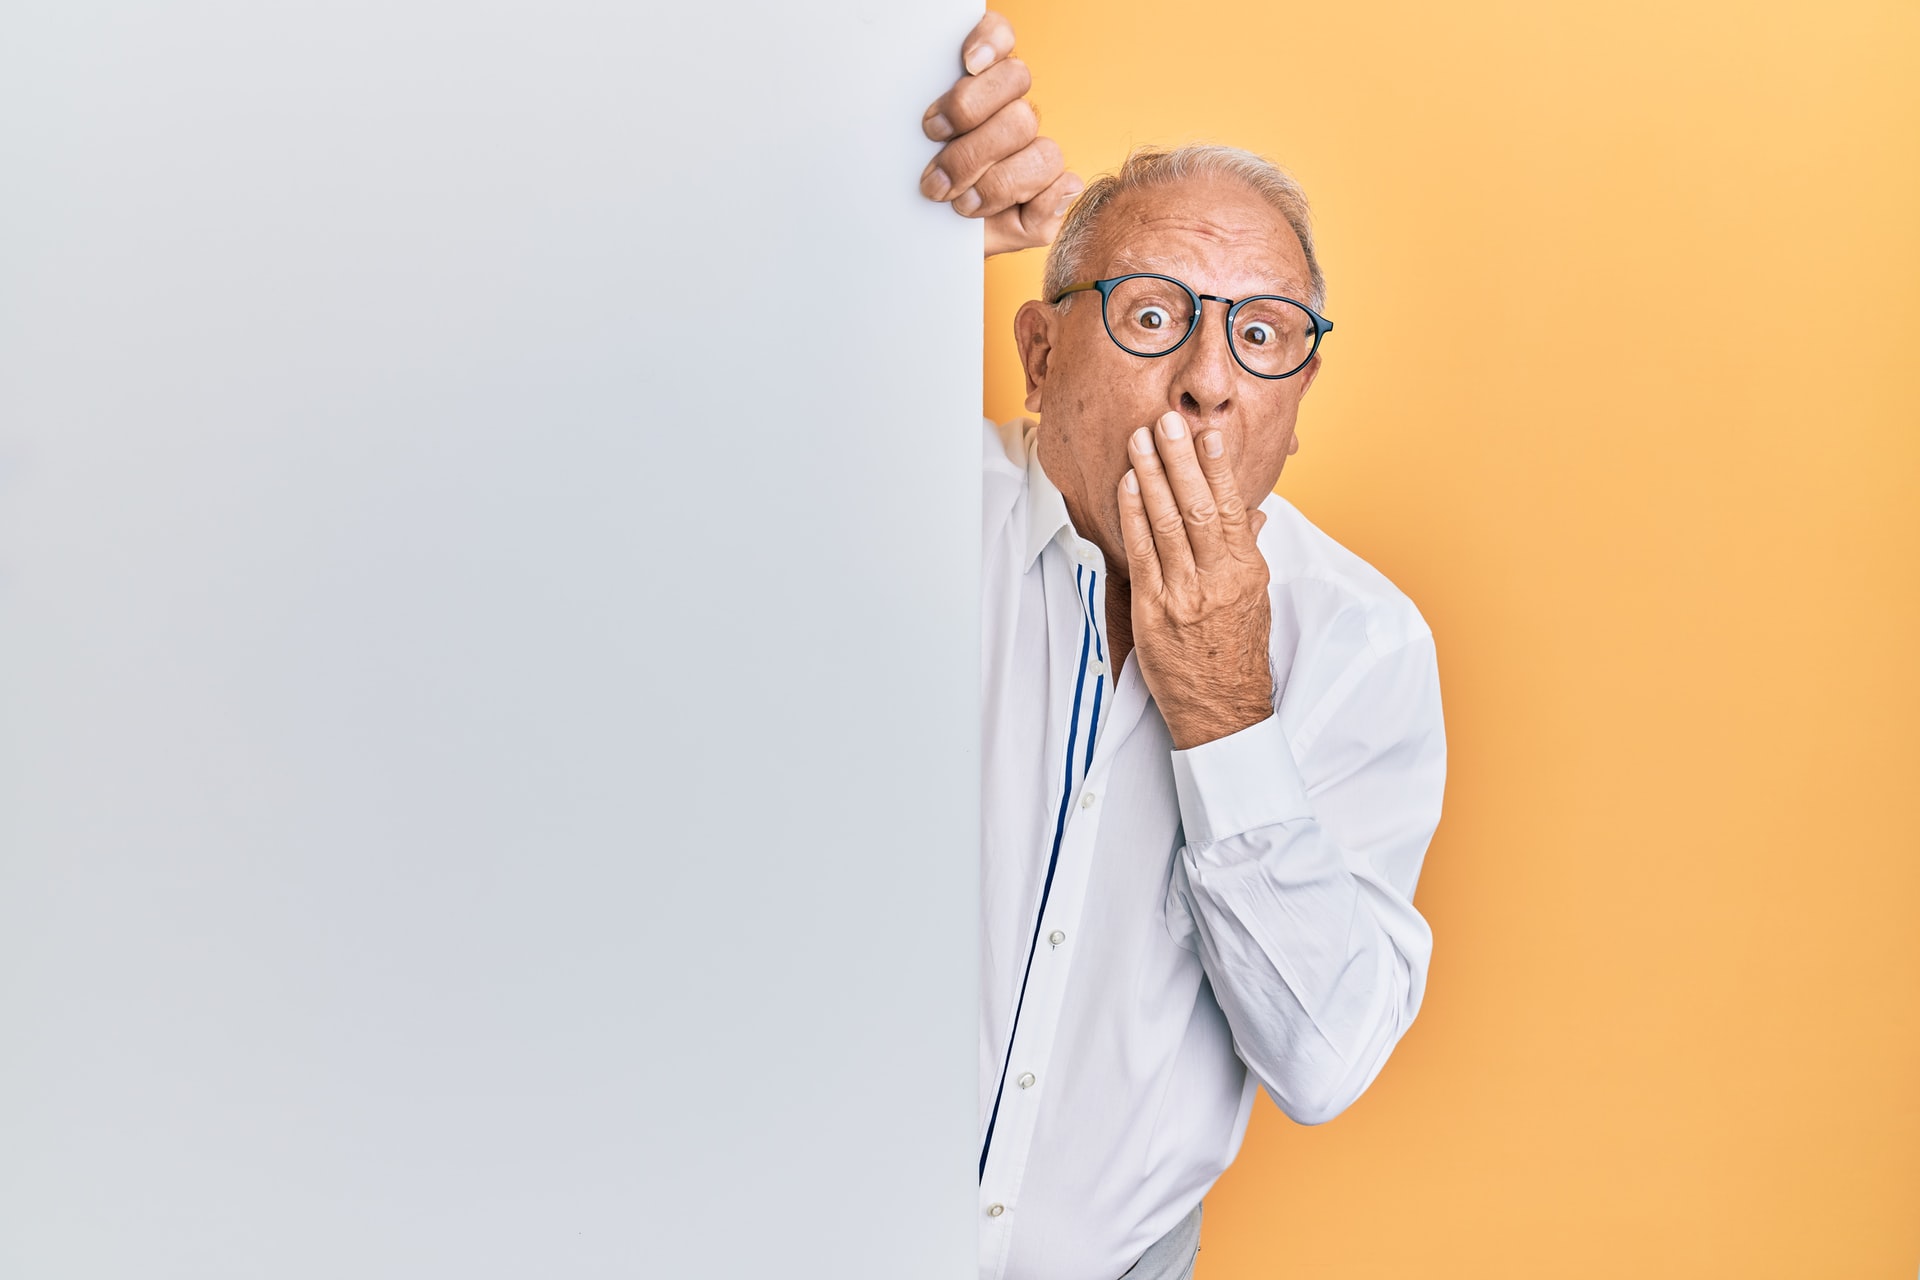 Surprised older man peeks out from behind a wall